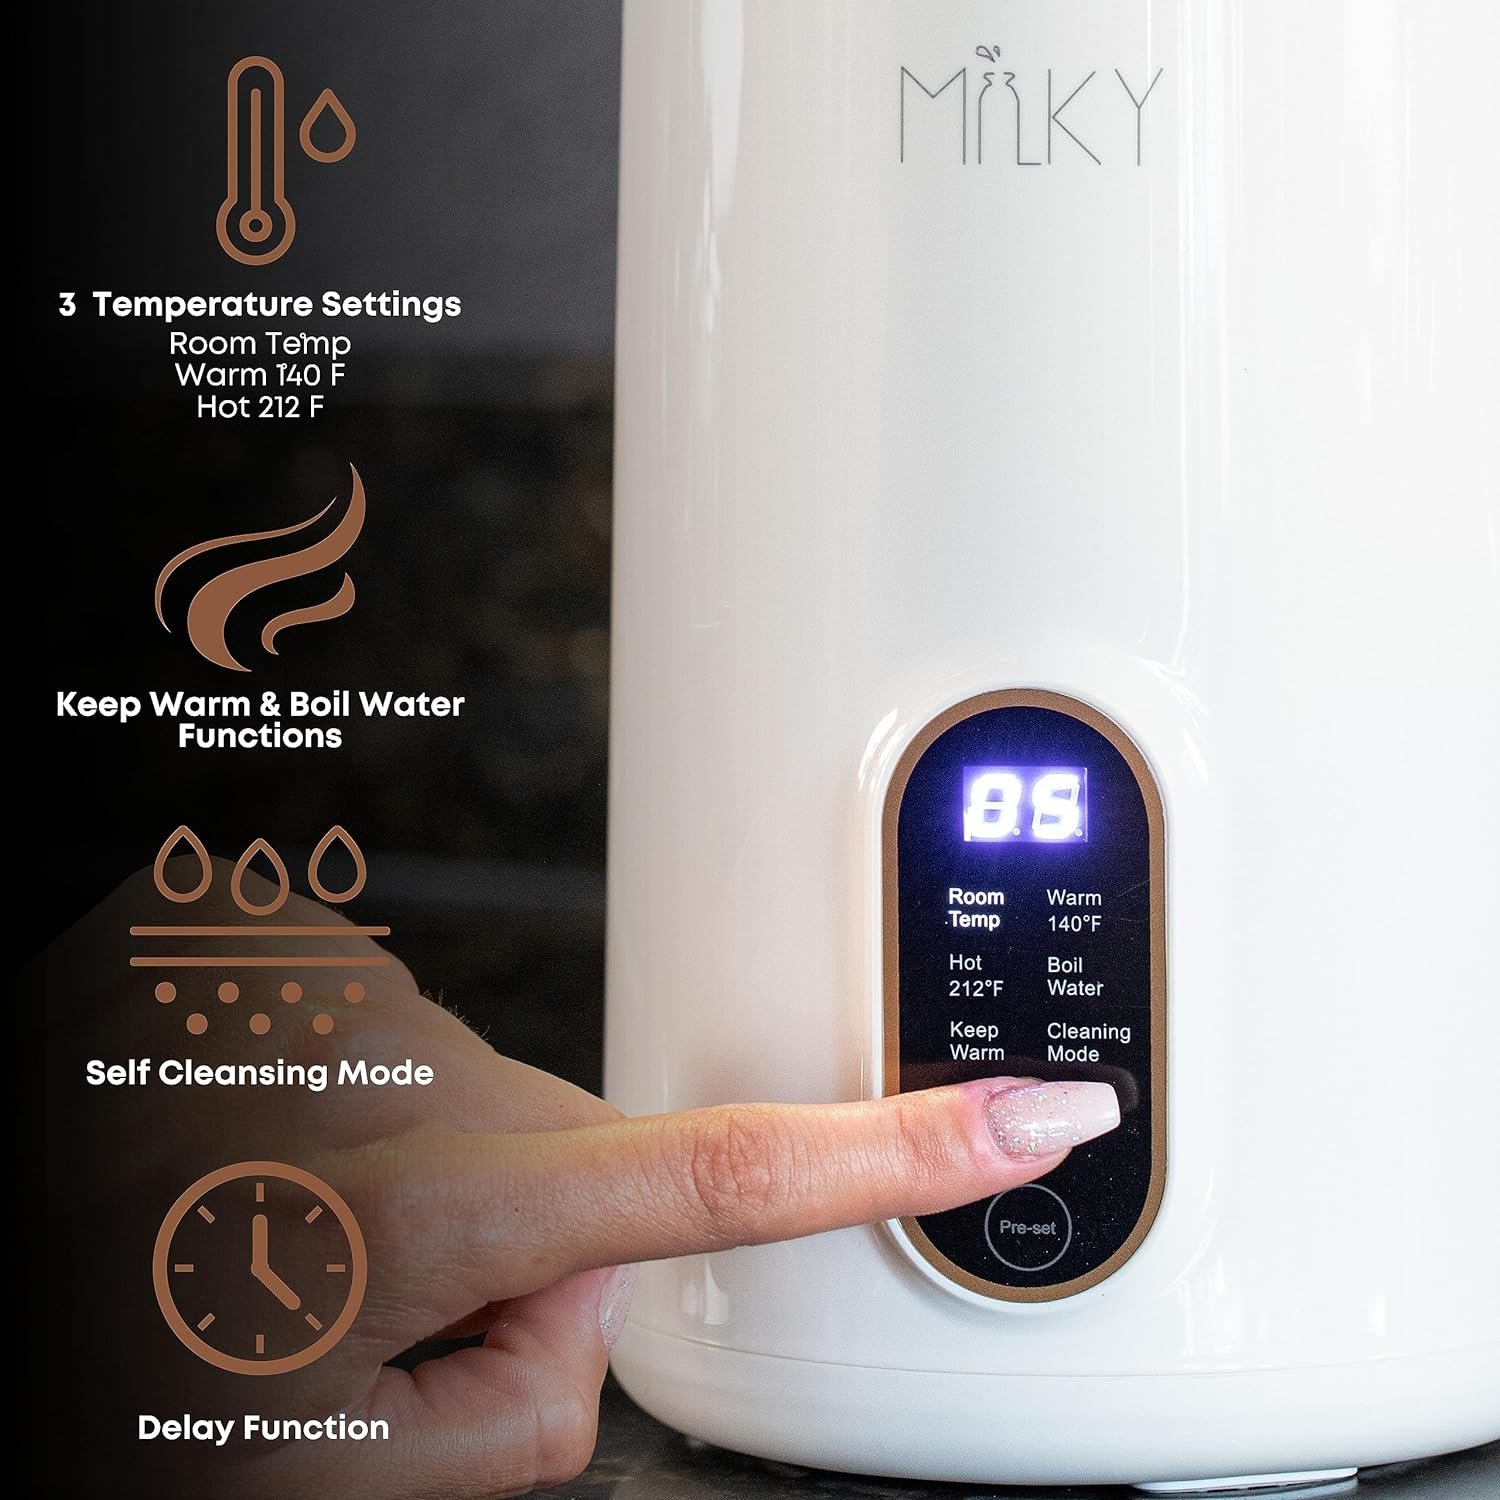 Milky Machine Automatic Nut Milk Maker, Homemade Dairy Free Cold or Hot Almond, Oat, Coconut, Soy, or Plant Based Milks, Boil and Blend One to Two Servings, Modern Sleek Design, Easy to Use, White